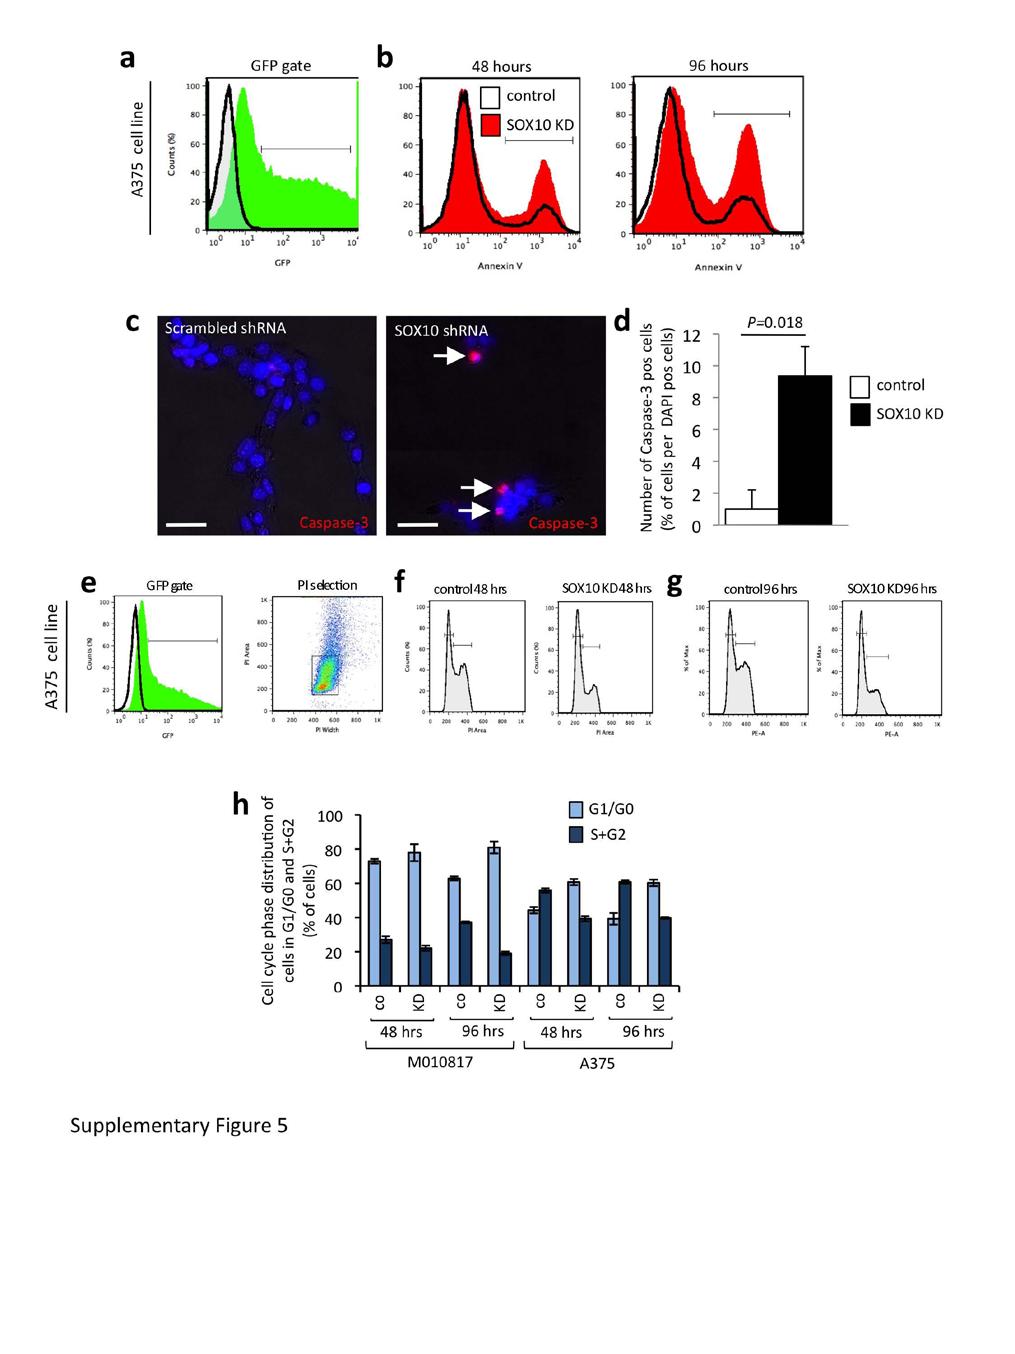 Figure S5 Knockdown of SOX10 induces cell cycle arrest and leads to increased apoptosis in human melanoma cells. a-b, FACS analysis of apoptosis in A375 cell line upon SOX10 knockdown.